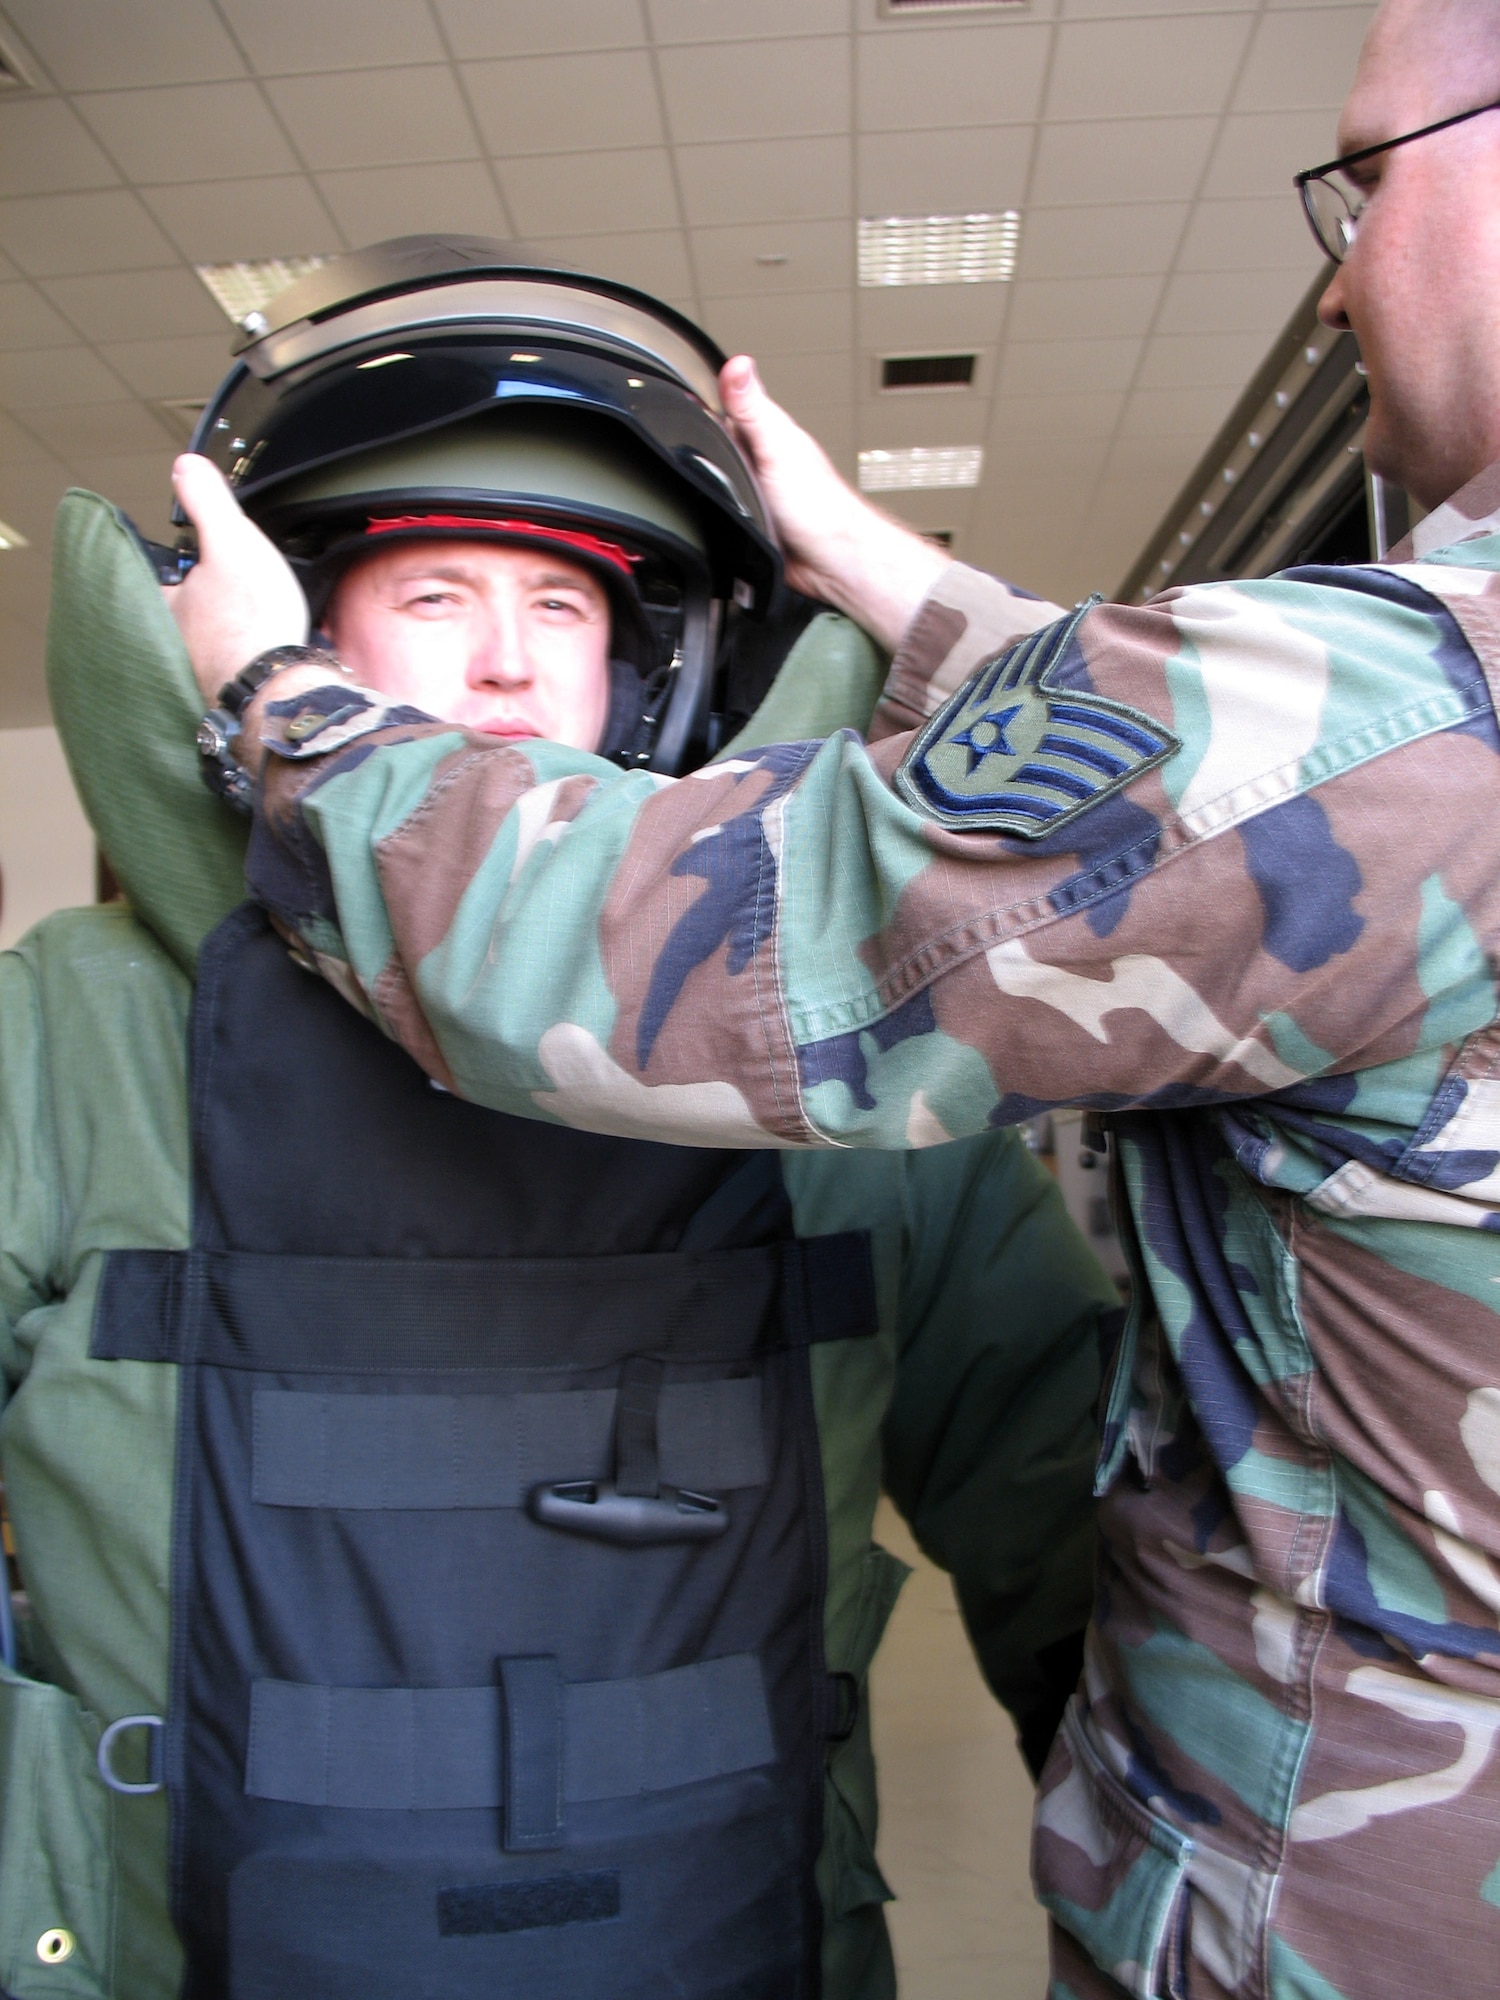 Staff Sgt. Kristoffer Solesbee (right) helps Staff Sgt. Edward Albietz with his bomb suit helmet March 12 in Iraq. The helmet is made of ballistic glass to help shield explosive ordnance members from a bomb blast and fragmentation. (U.S. Air Force photo)